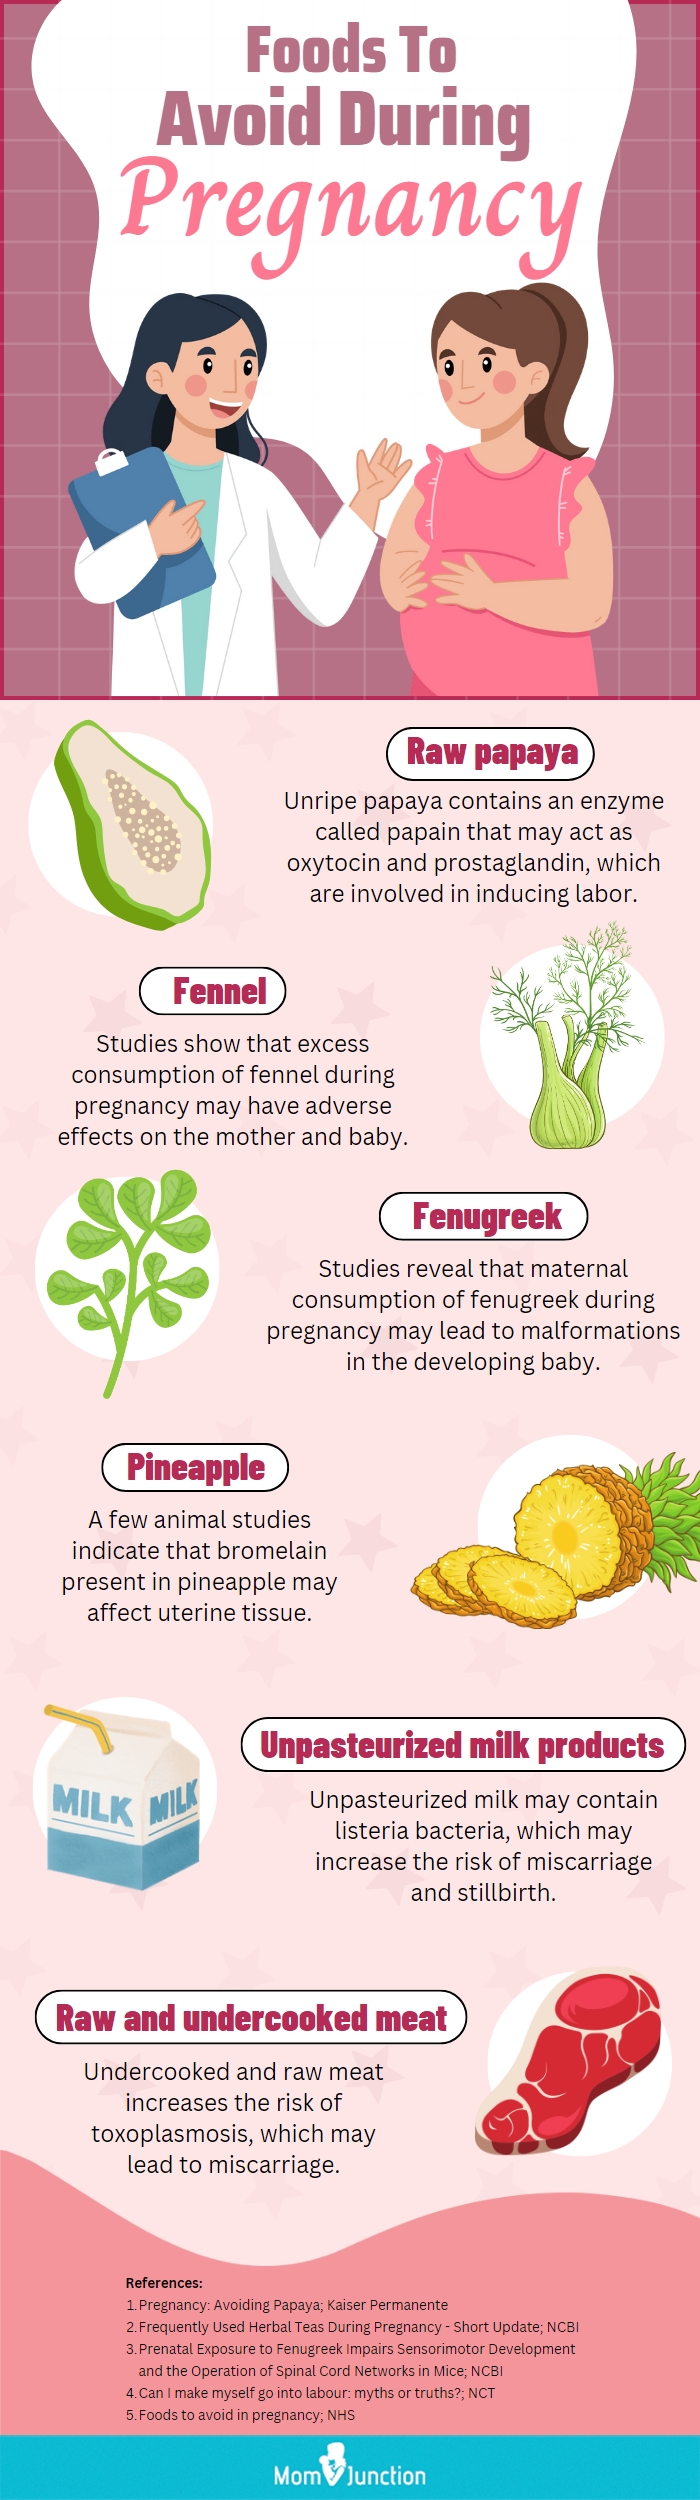 foods to avoid during pregnancy (infographic)